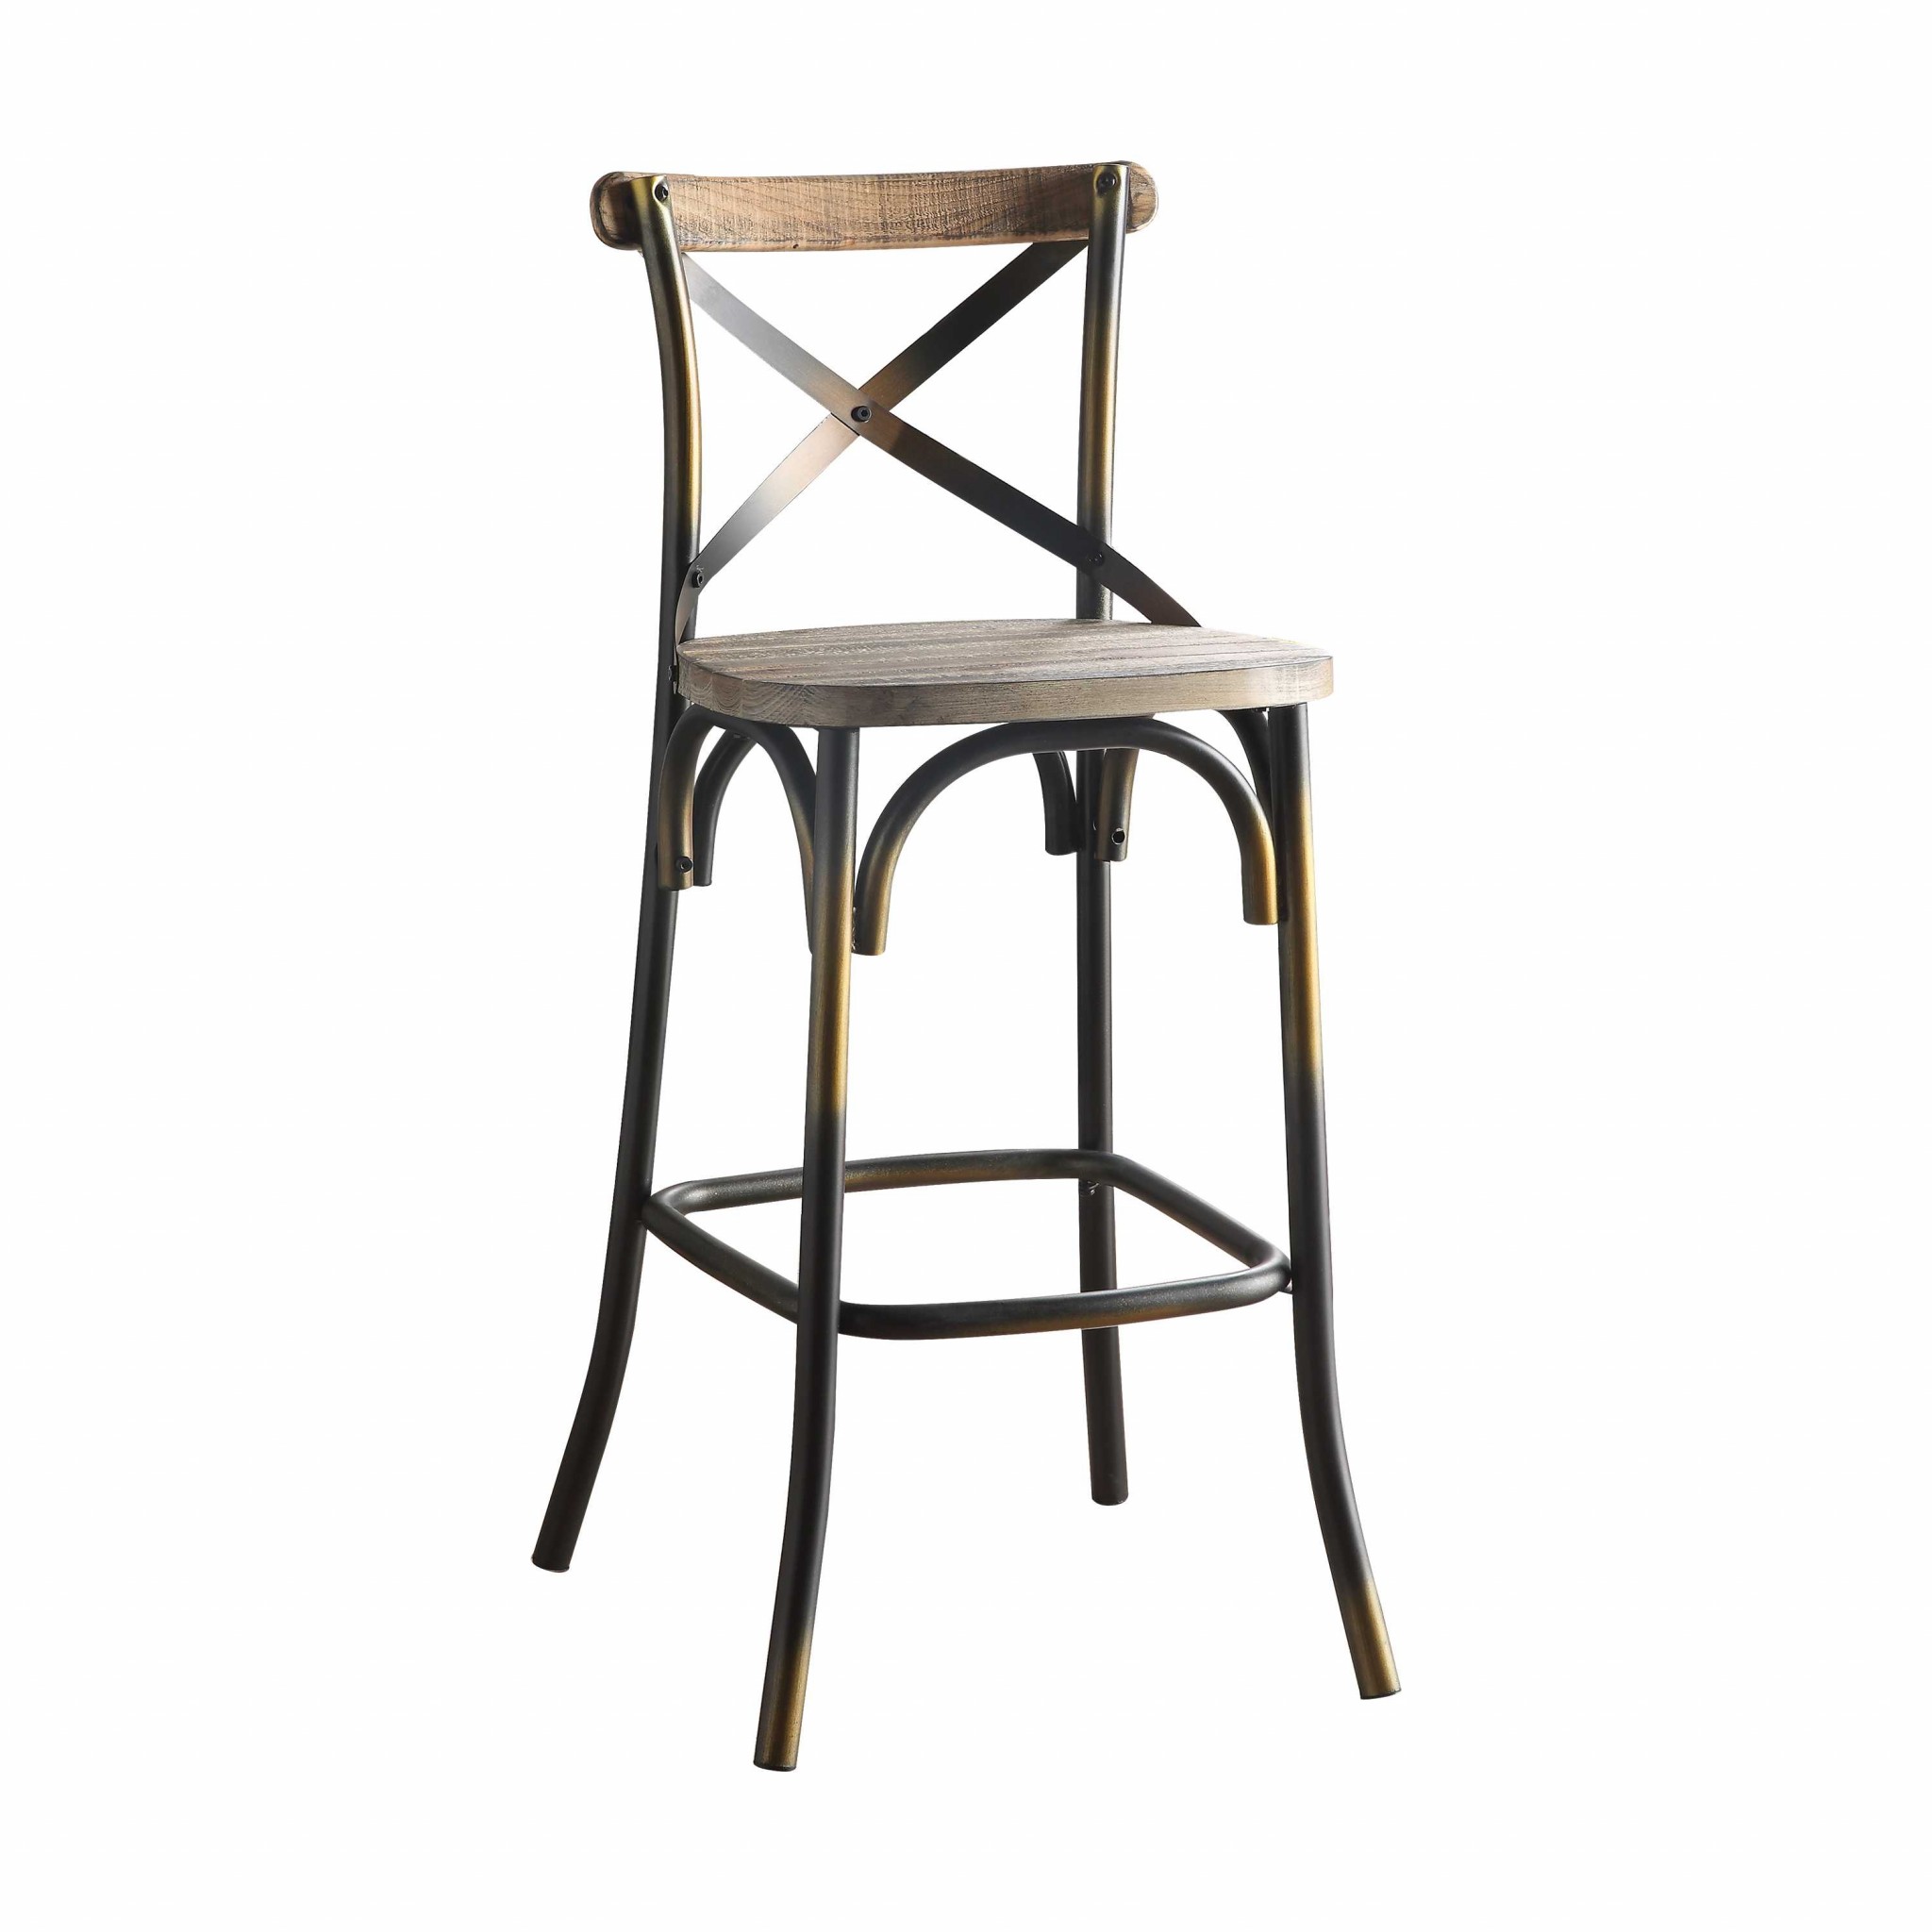 43" High Back Antiqued Copper and Oak Finish Bar Chair